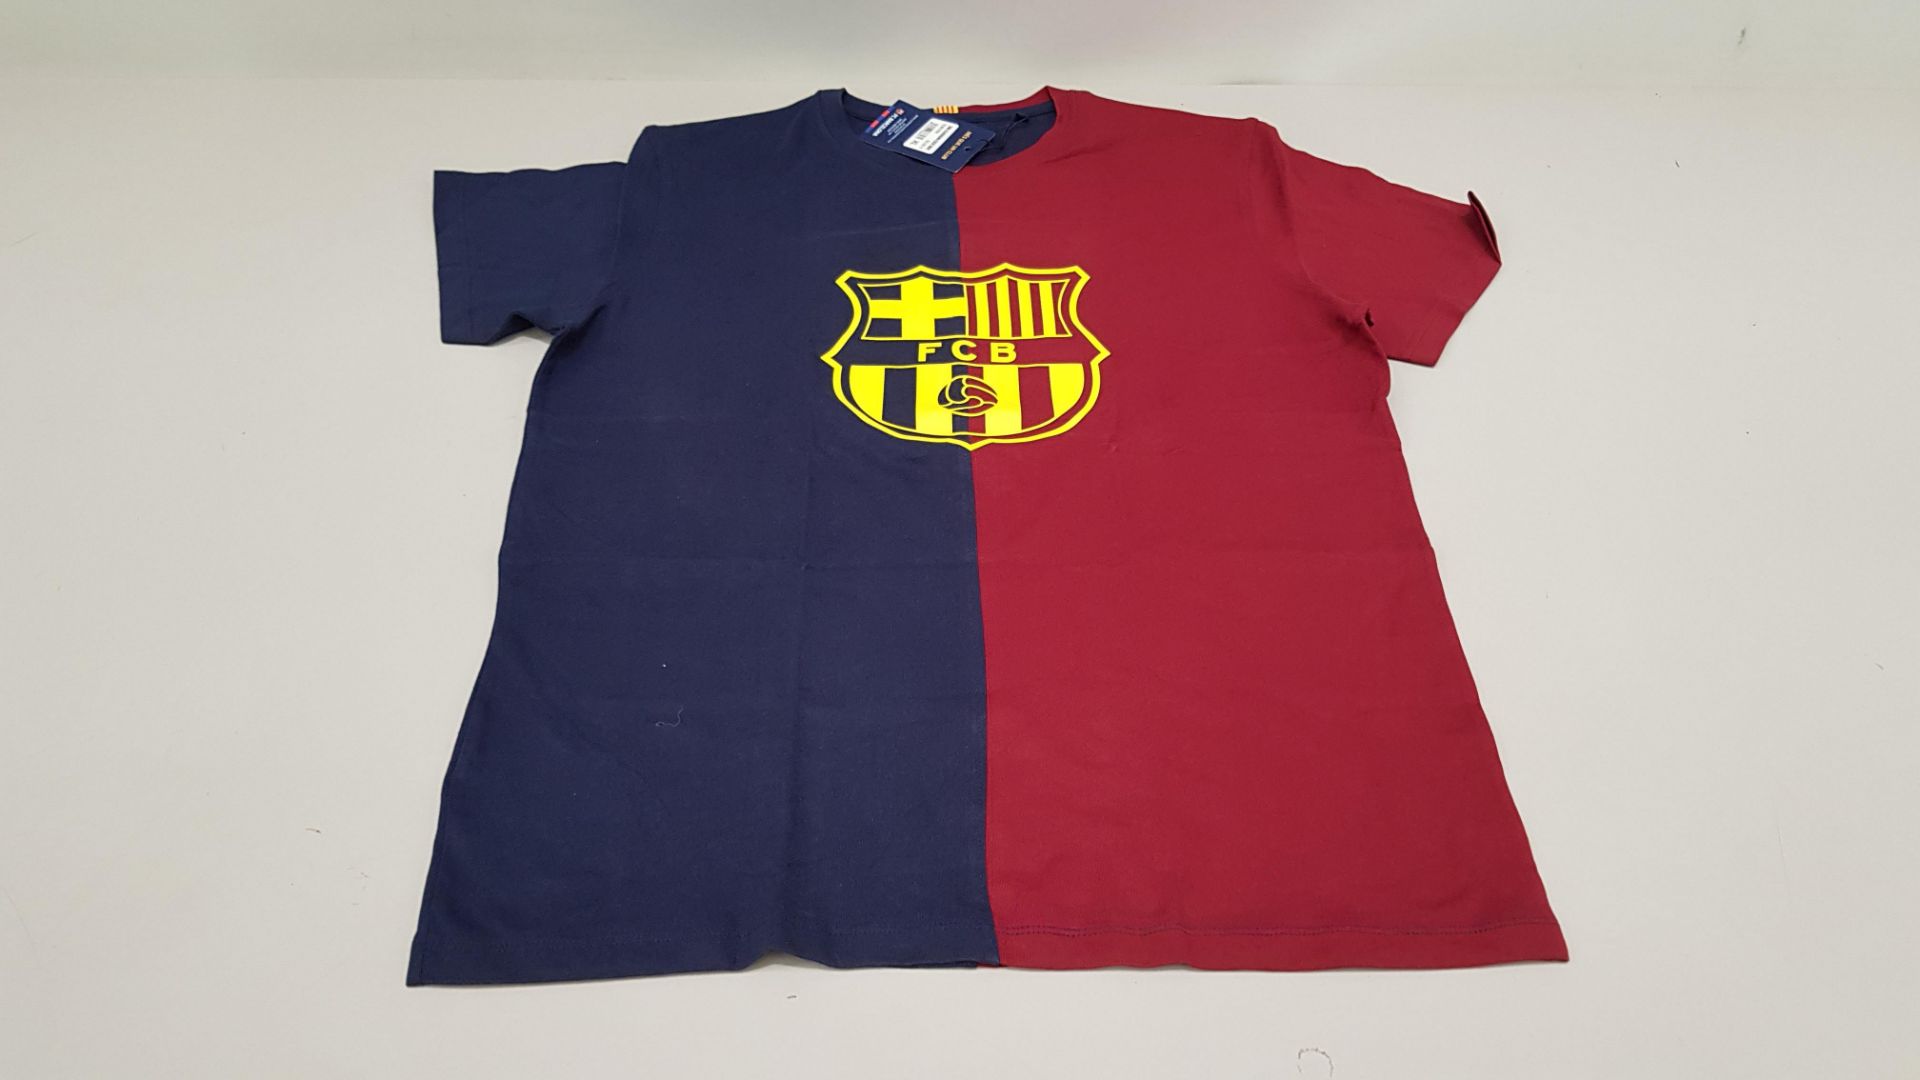 18 X BRAND NEW BARCA STORE OFFICIAL MERCHANDISE FC BARCELONA NAVY AND BURGUNDY SHORT SLEEVED TOPS